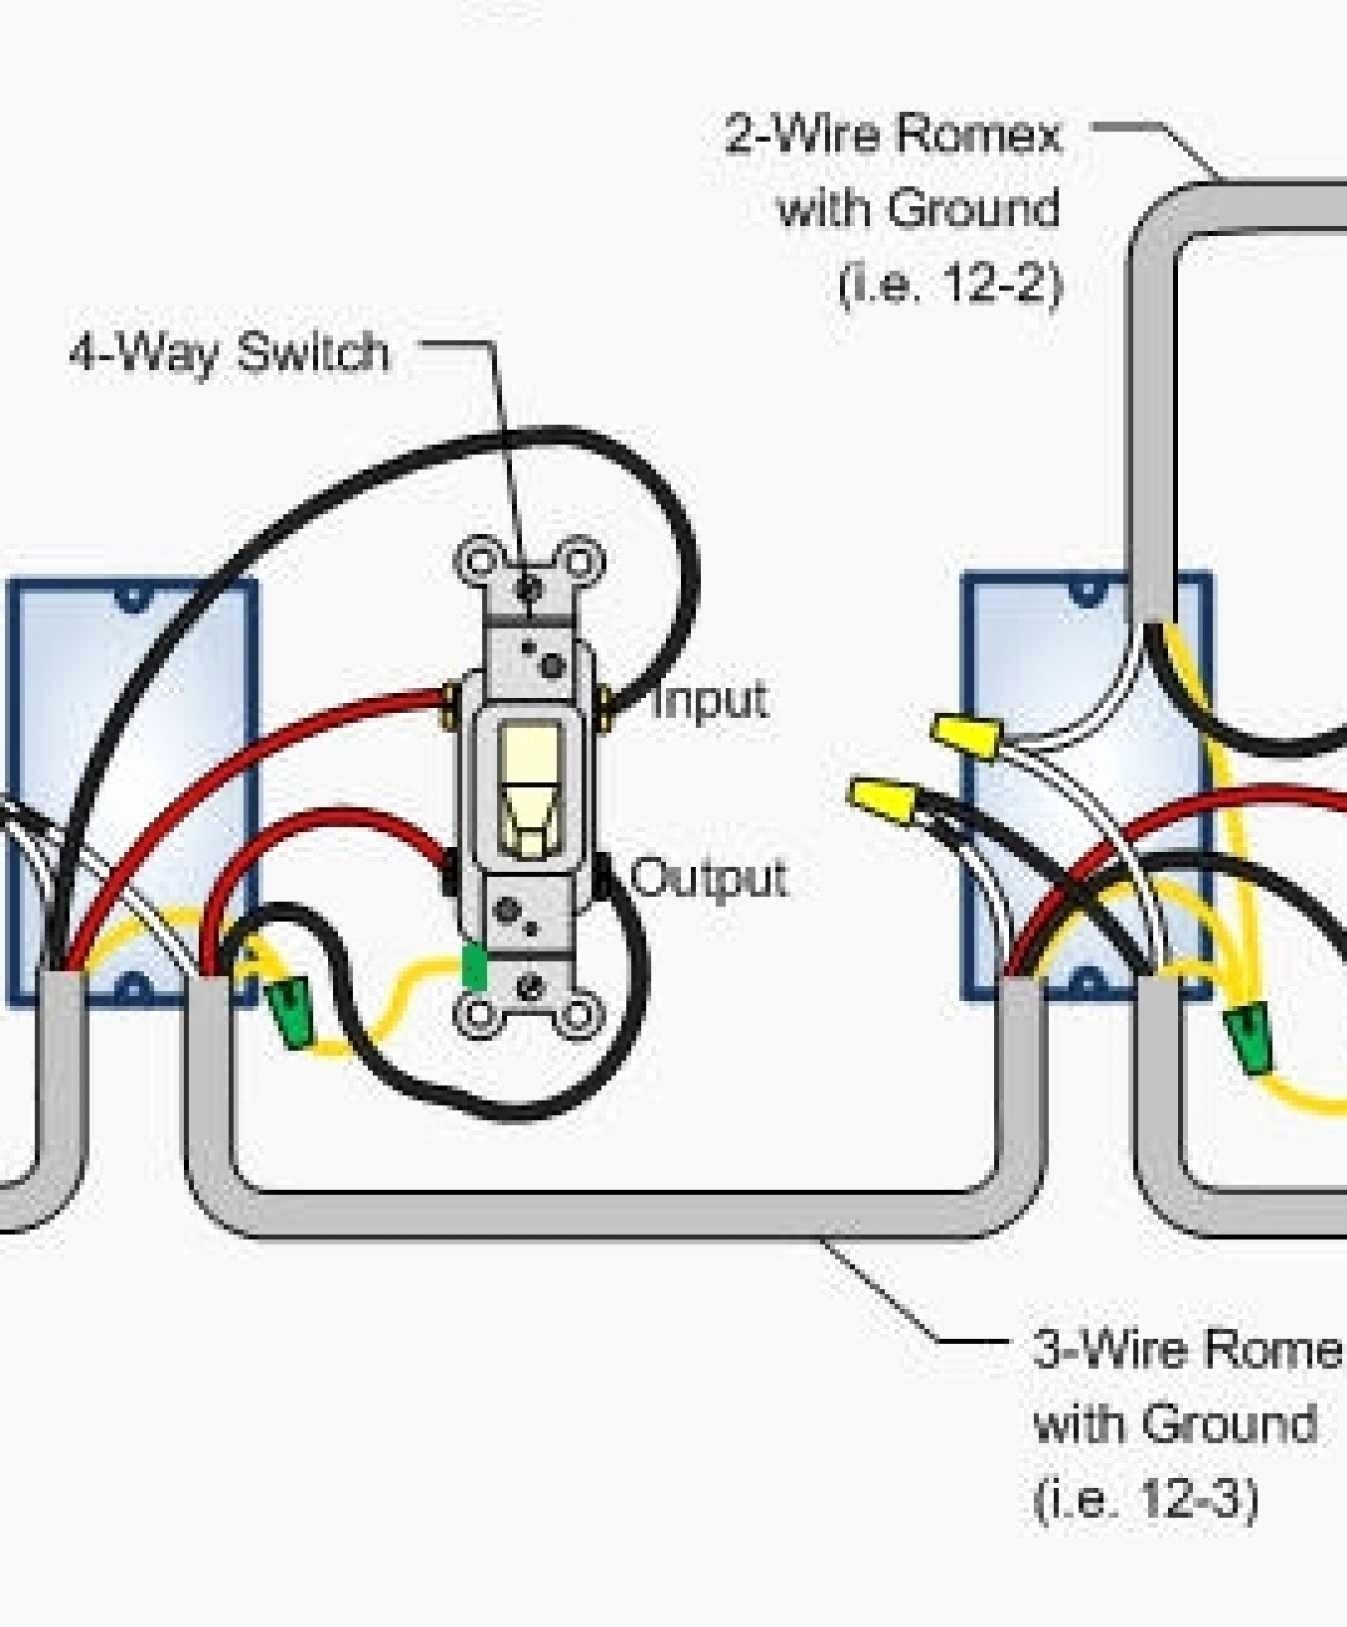 How To Install The Lutron Digital Dimmer Kit As A 3-way Switch